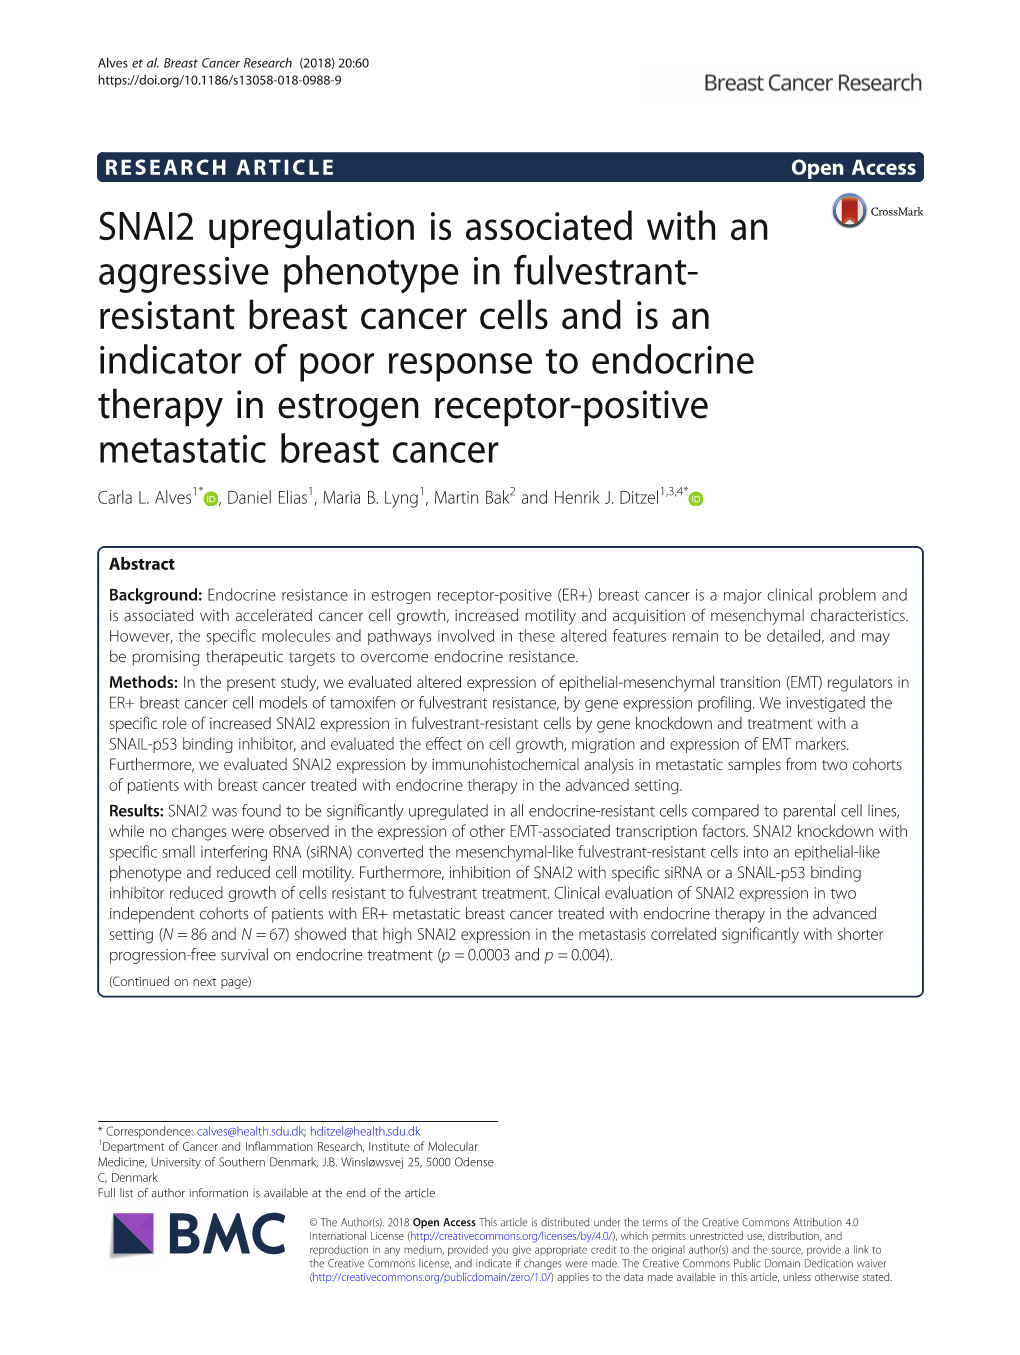 SNAI2 Upregulation Is Associated with An